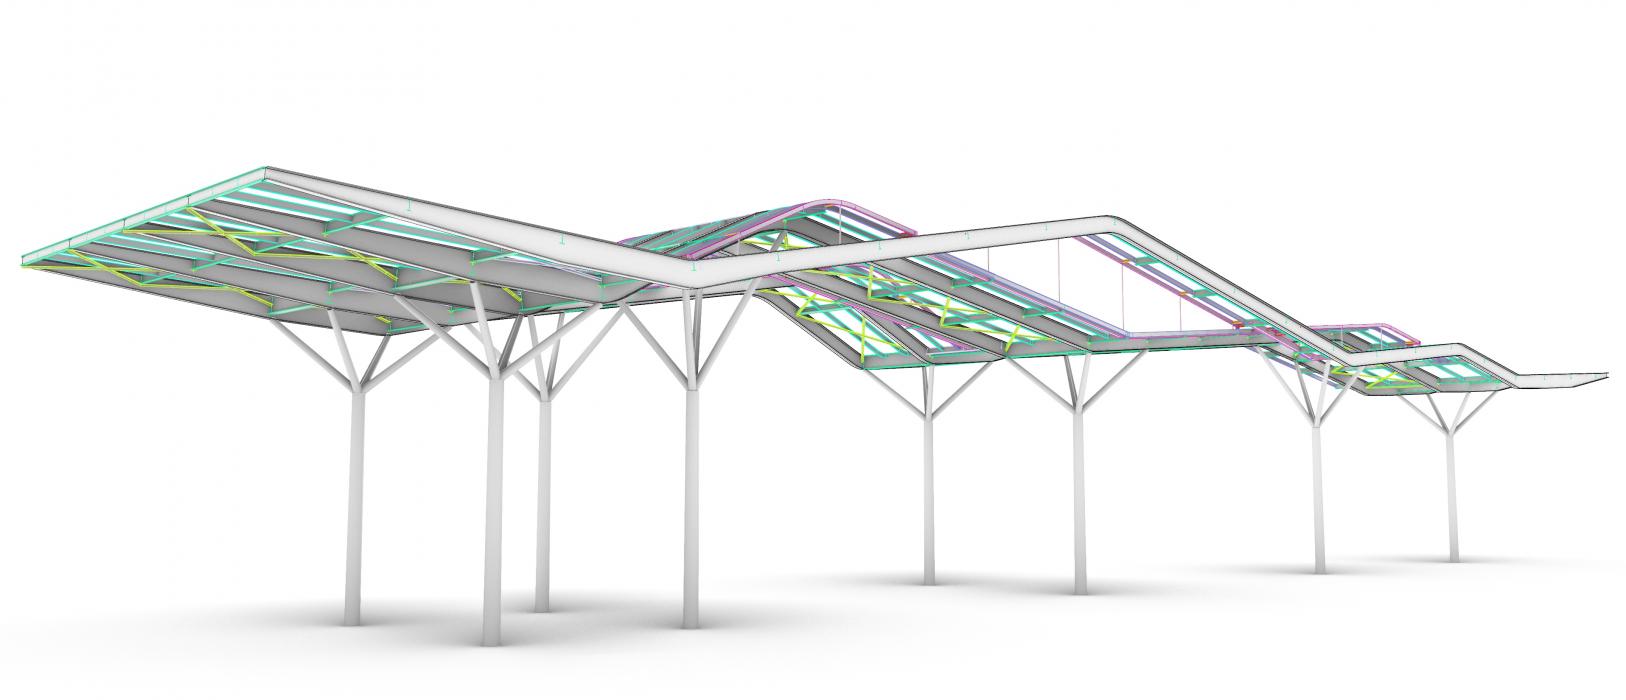 Analysis model of Pittsburgh International Airport entry canopy, Pittsburgh, Pennsylvania.